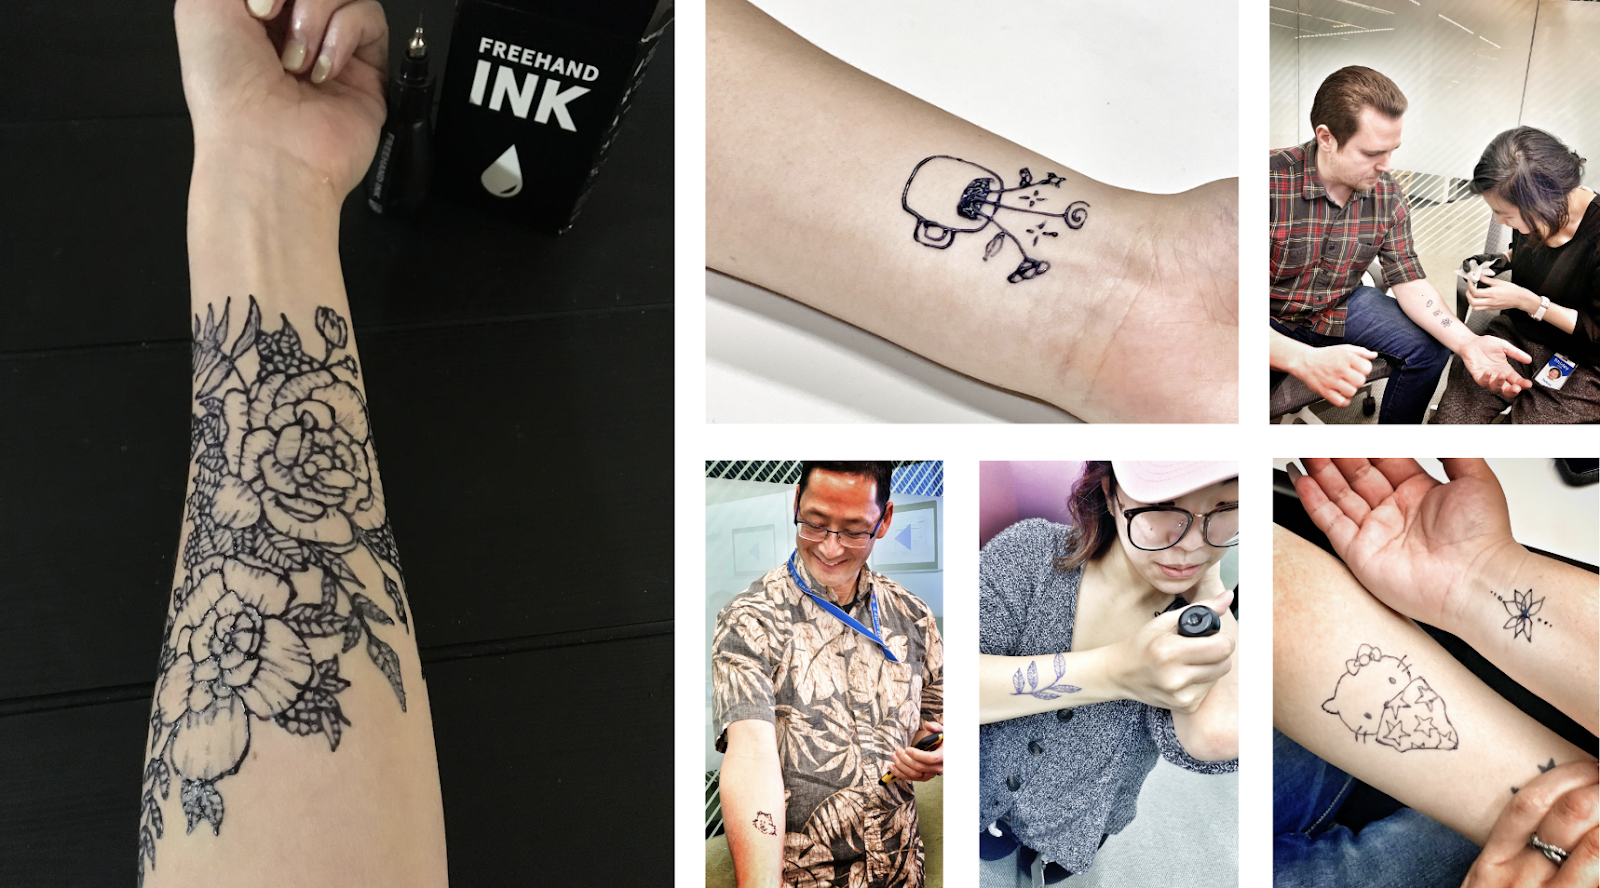 Collage of people in a conference room applying and showing off temporary tattoos